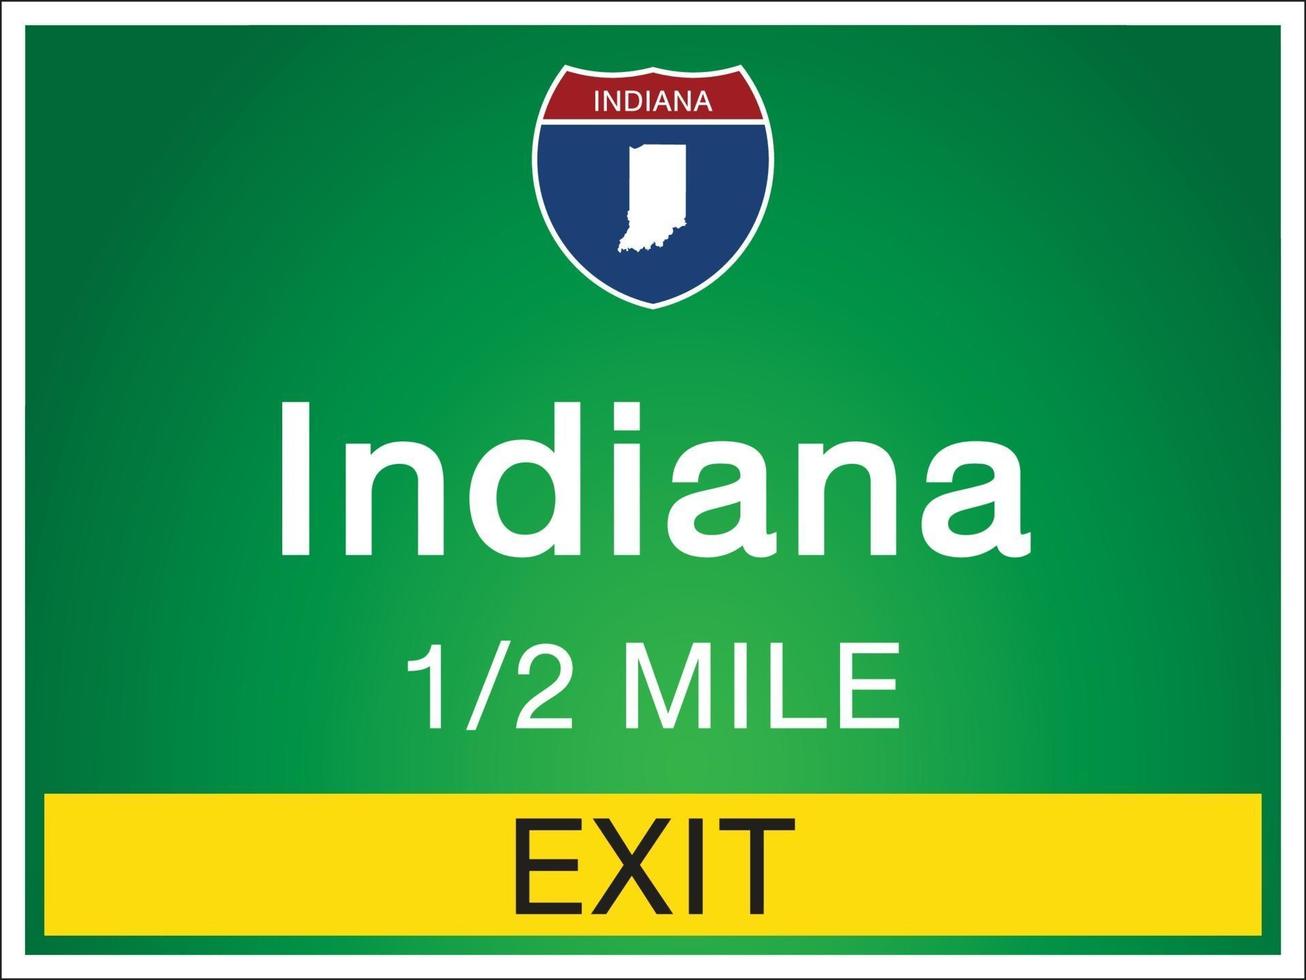 Signage on the highway in Indiana state information and maps vector